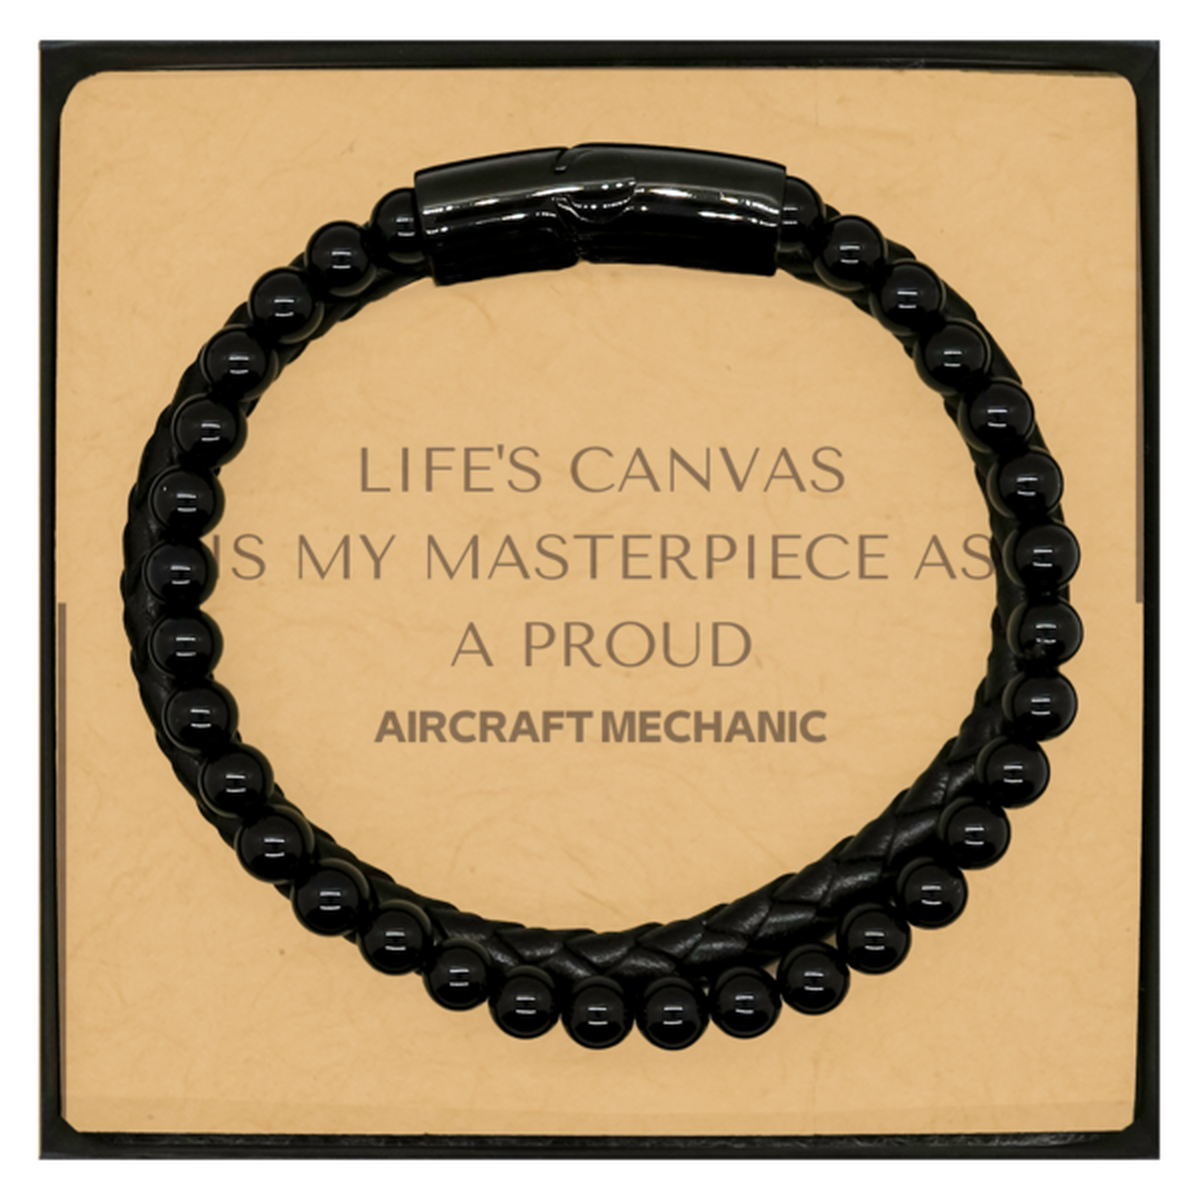 Proud Aircraft Mechanic Gifts, Life's canvas is my masterpiece, Epic Birthday Christmas Unique Stone Leather Bracelets For Aircraft Mechanic, Coworkers, Men, Women, Friends